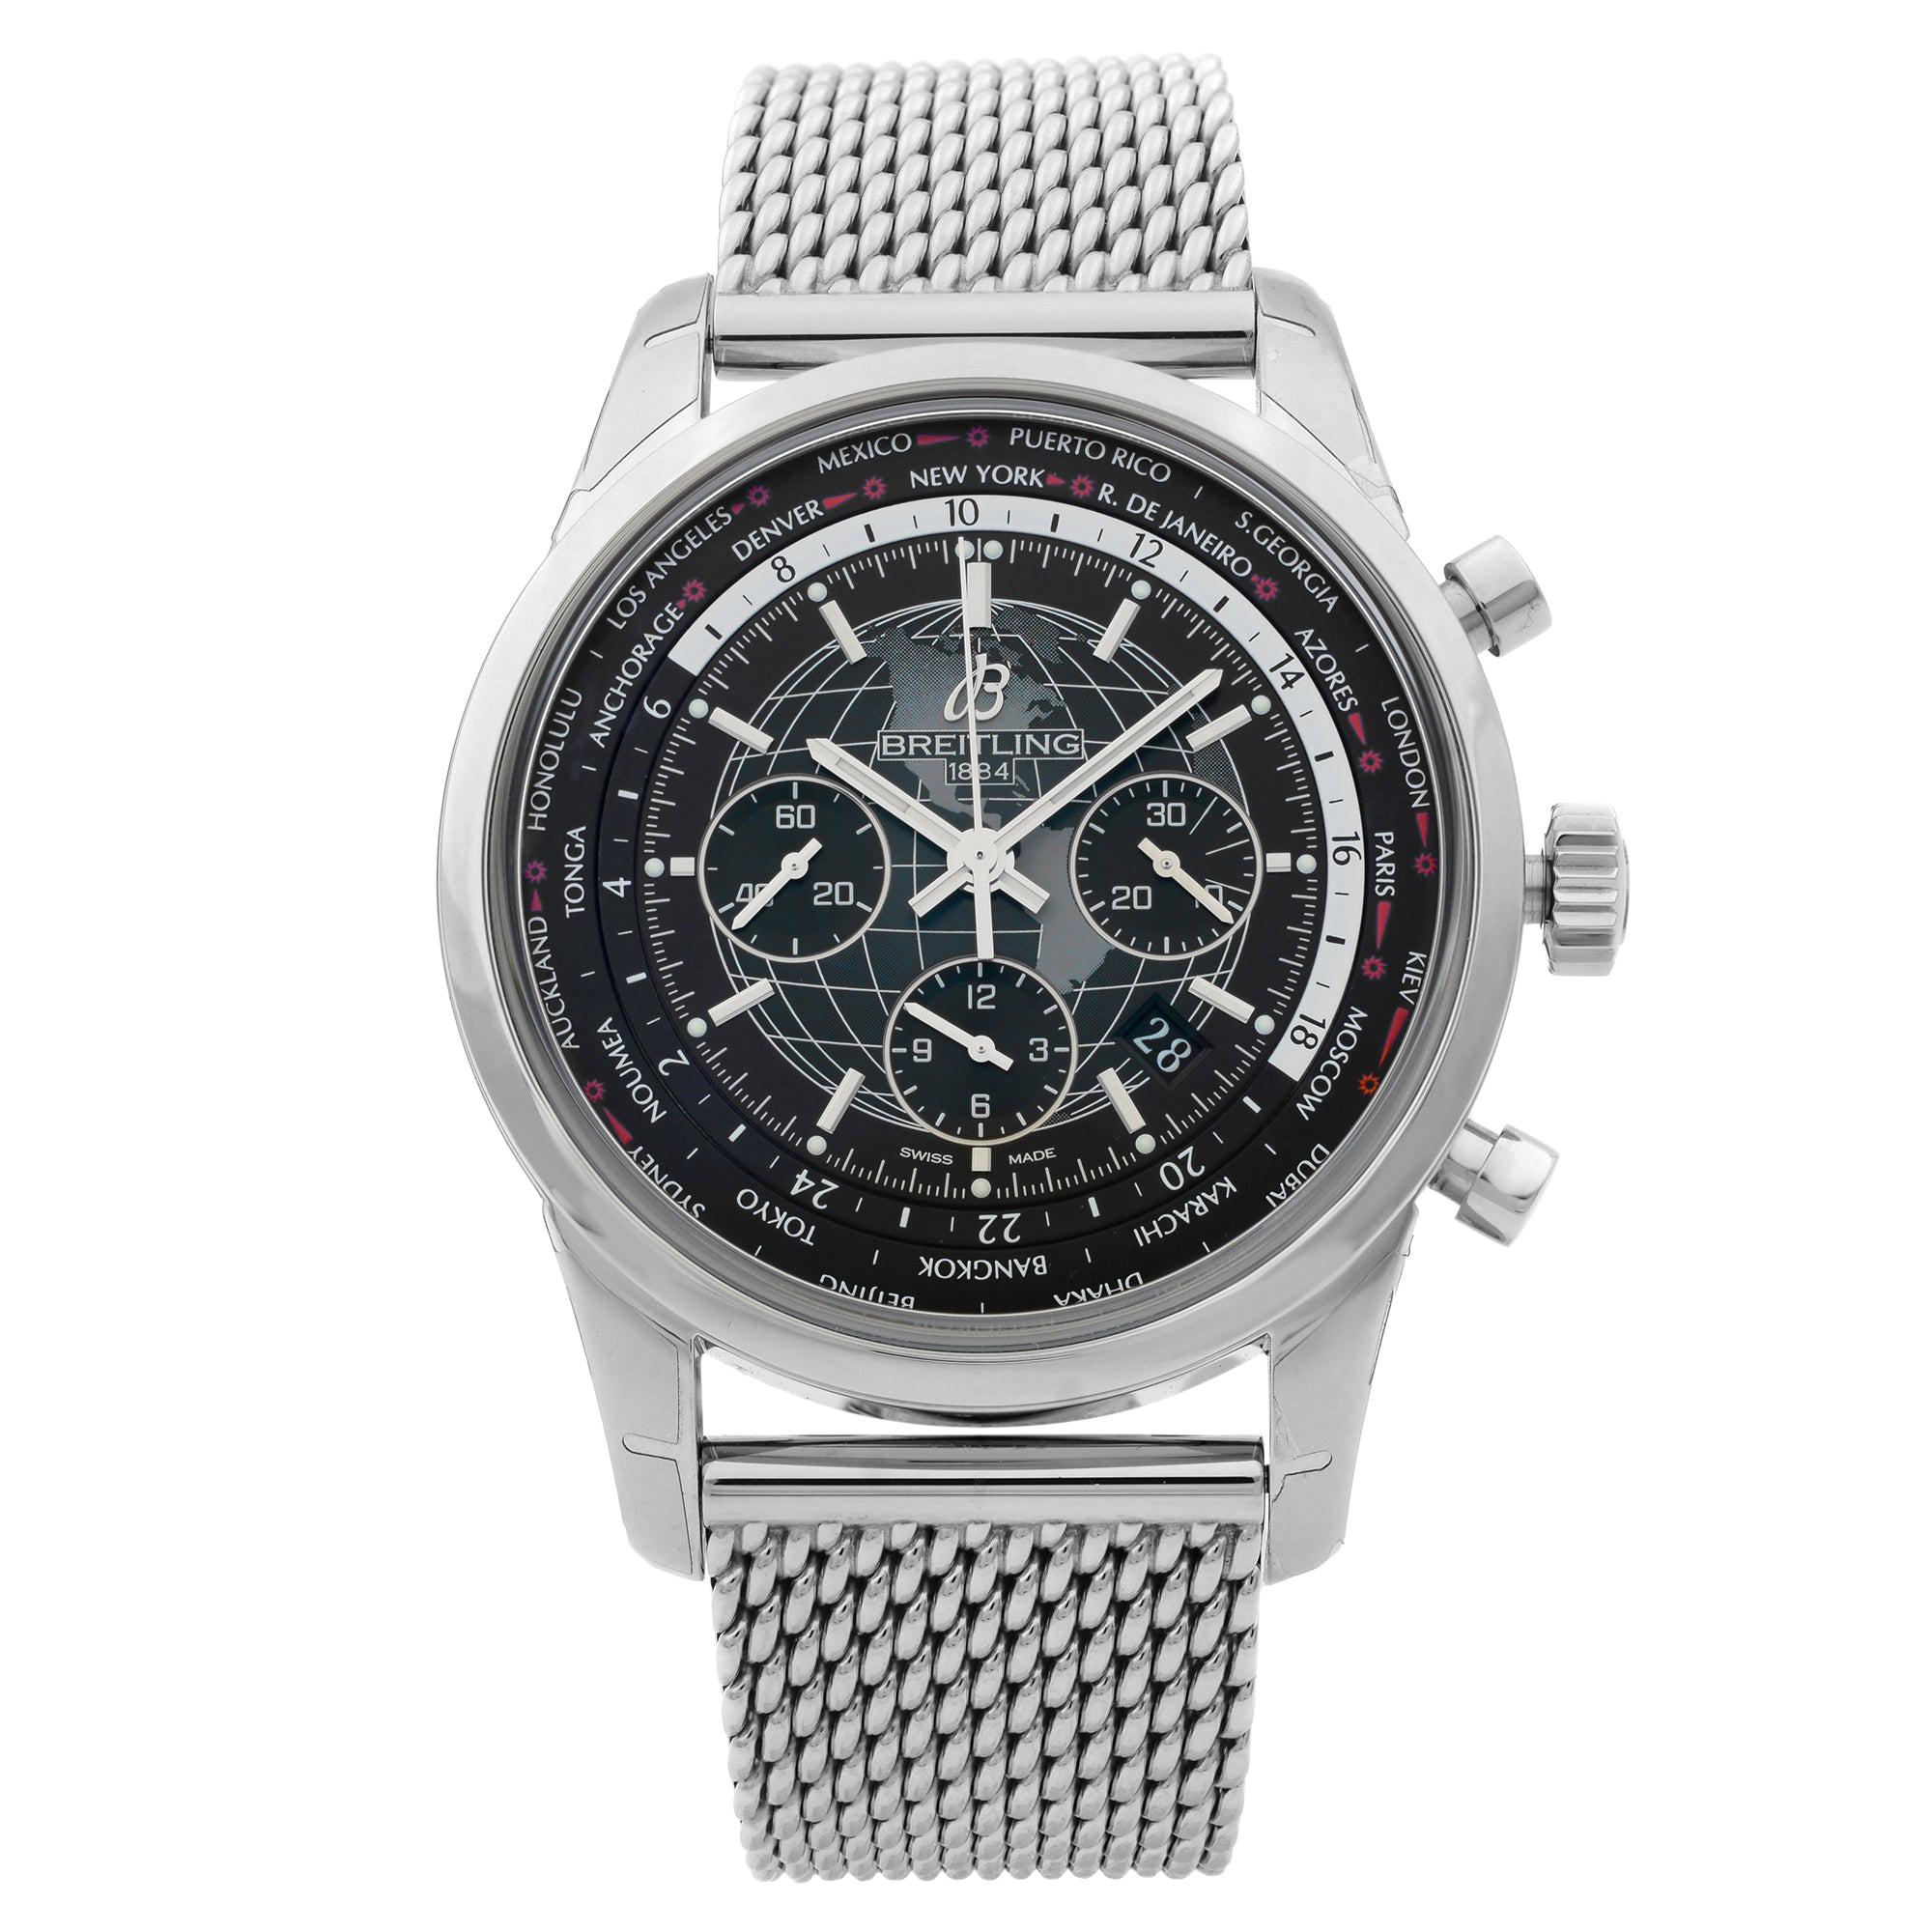 Breitling Transocean Unitime World Time Automatic Men’s Watch AB0510U4/BE84-152A